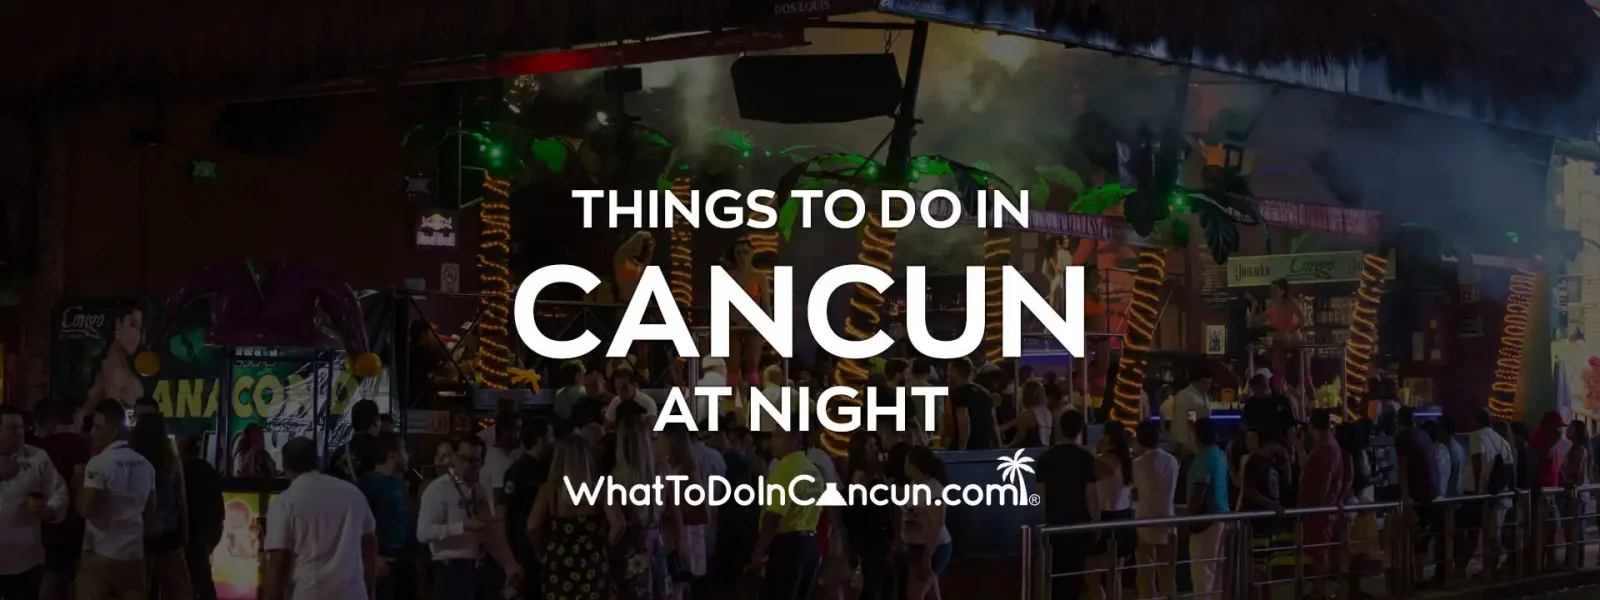 things to do in cancun at night